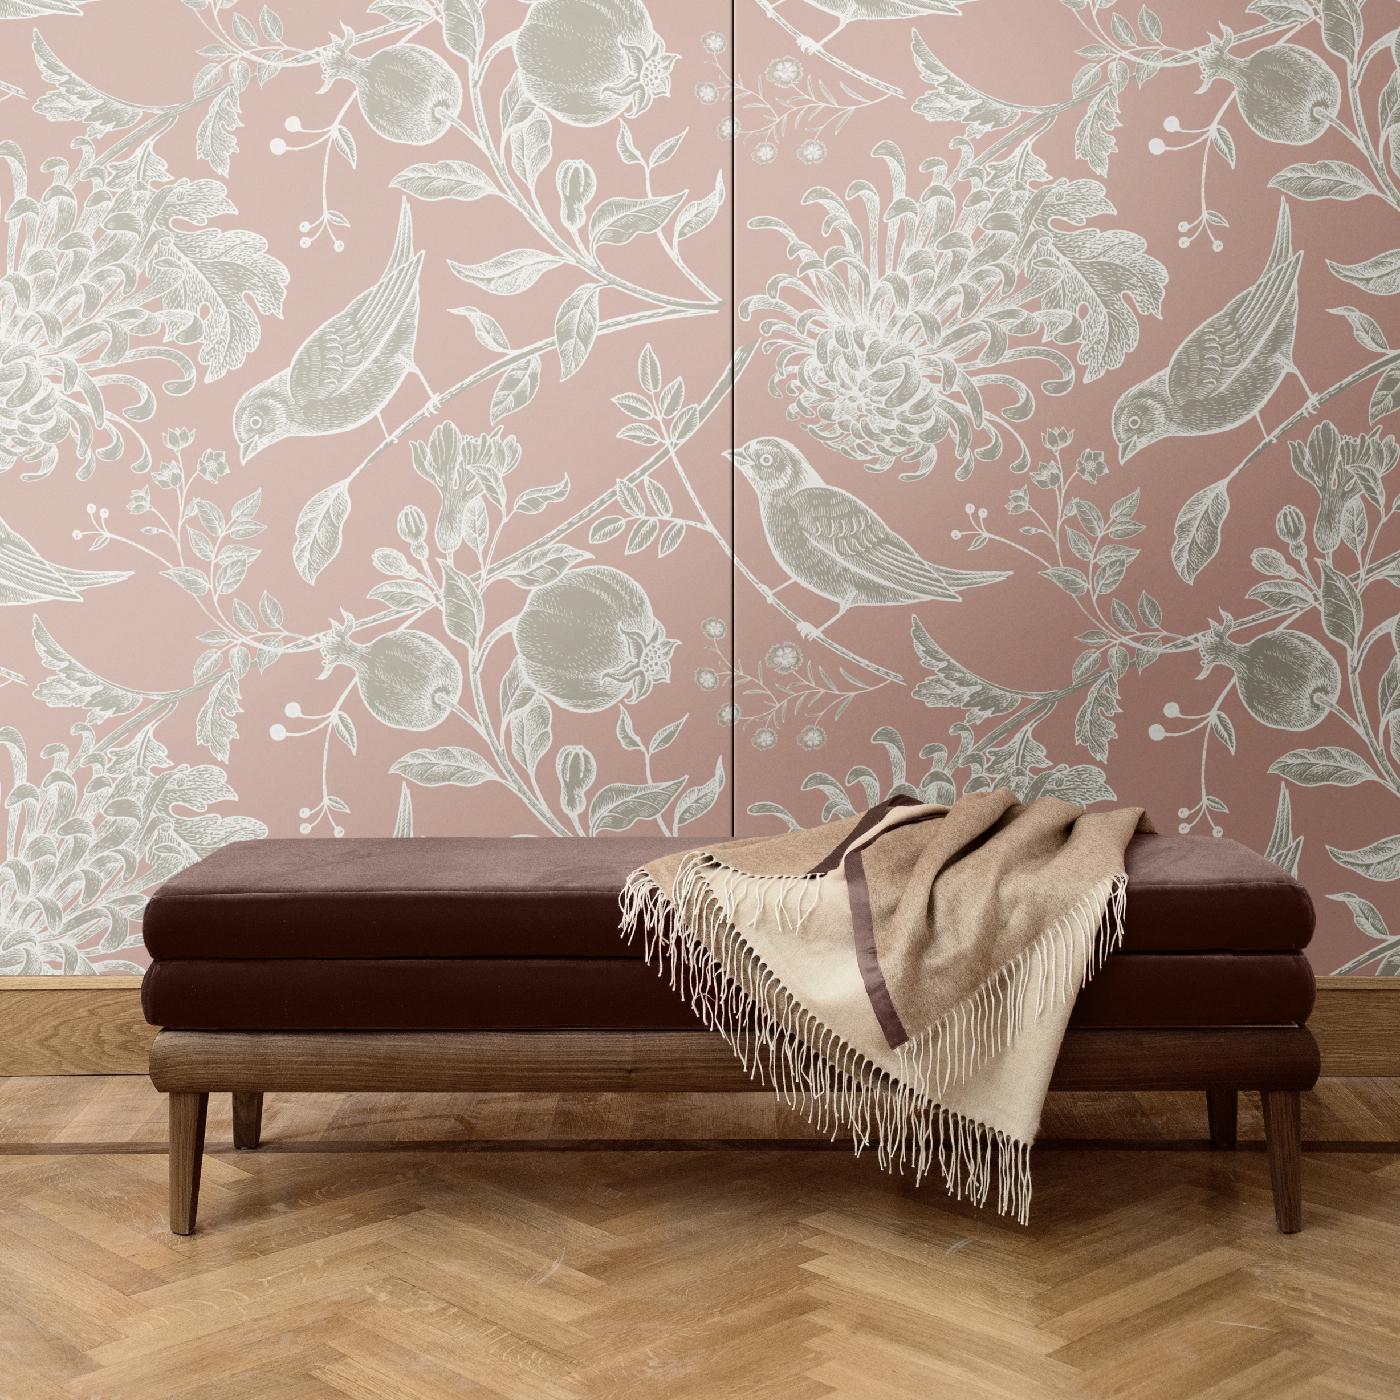 This stunning wall covering is a superb accent to add anywhere in the house, where it will imbue with luxury and a unique decoration any room. It was crafted of silk and cotton and is part of the Flowers and Birds collection, with a sumptuous color